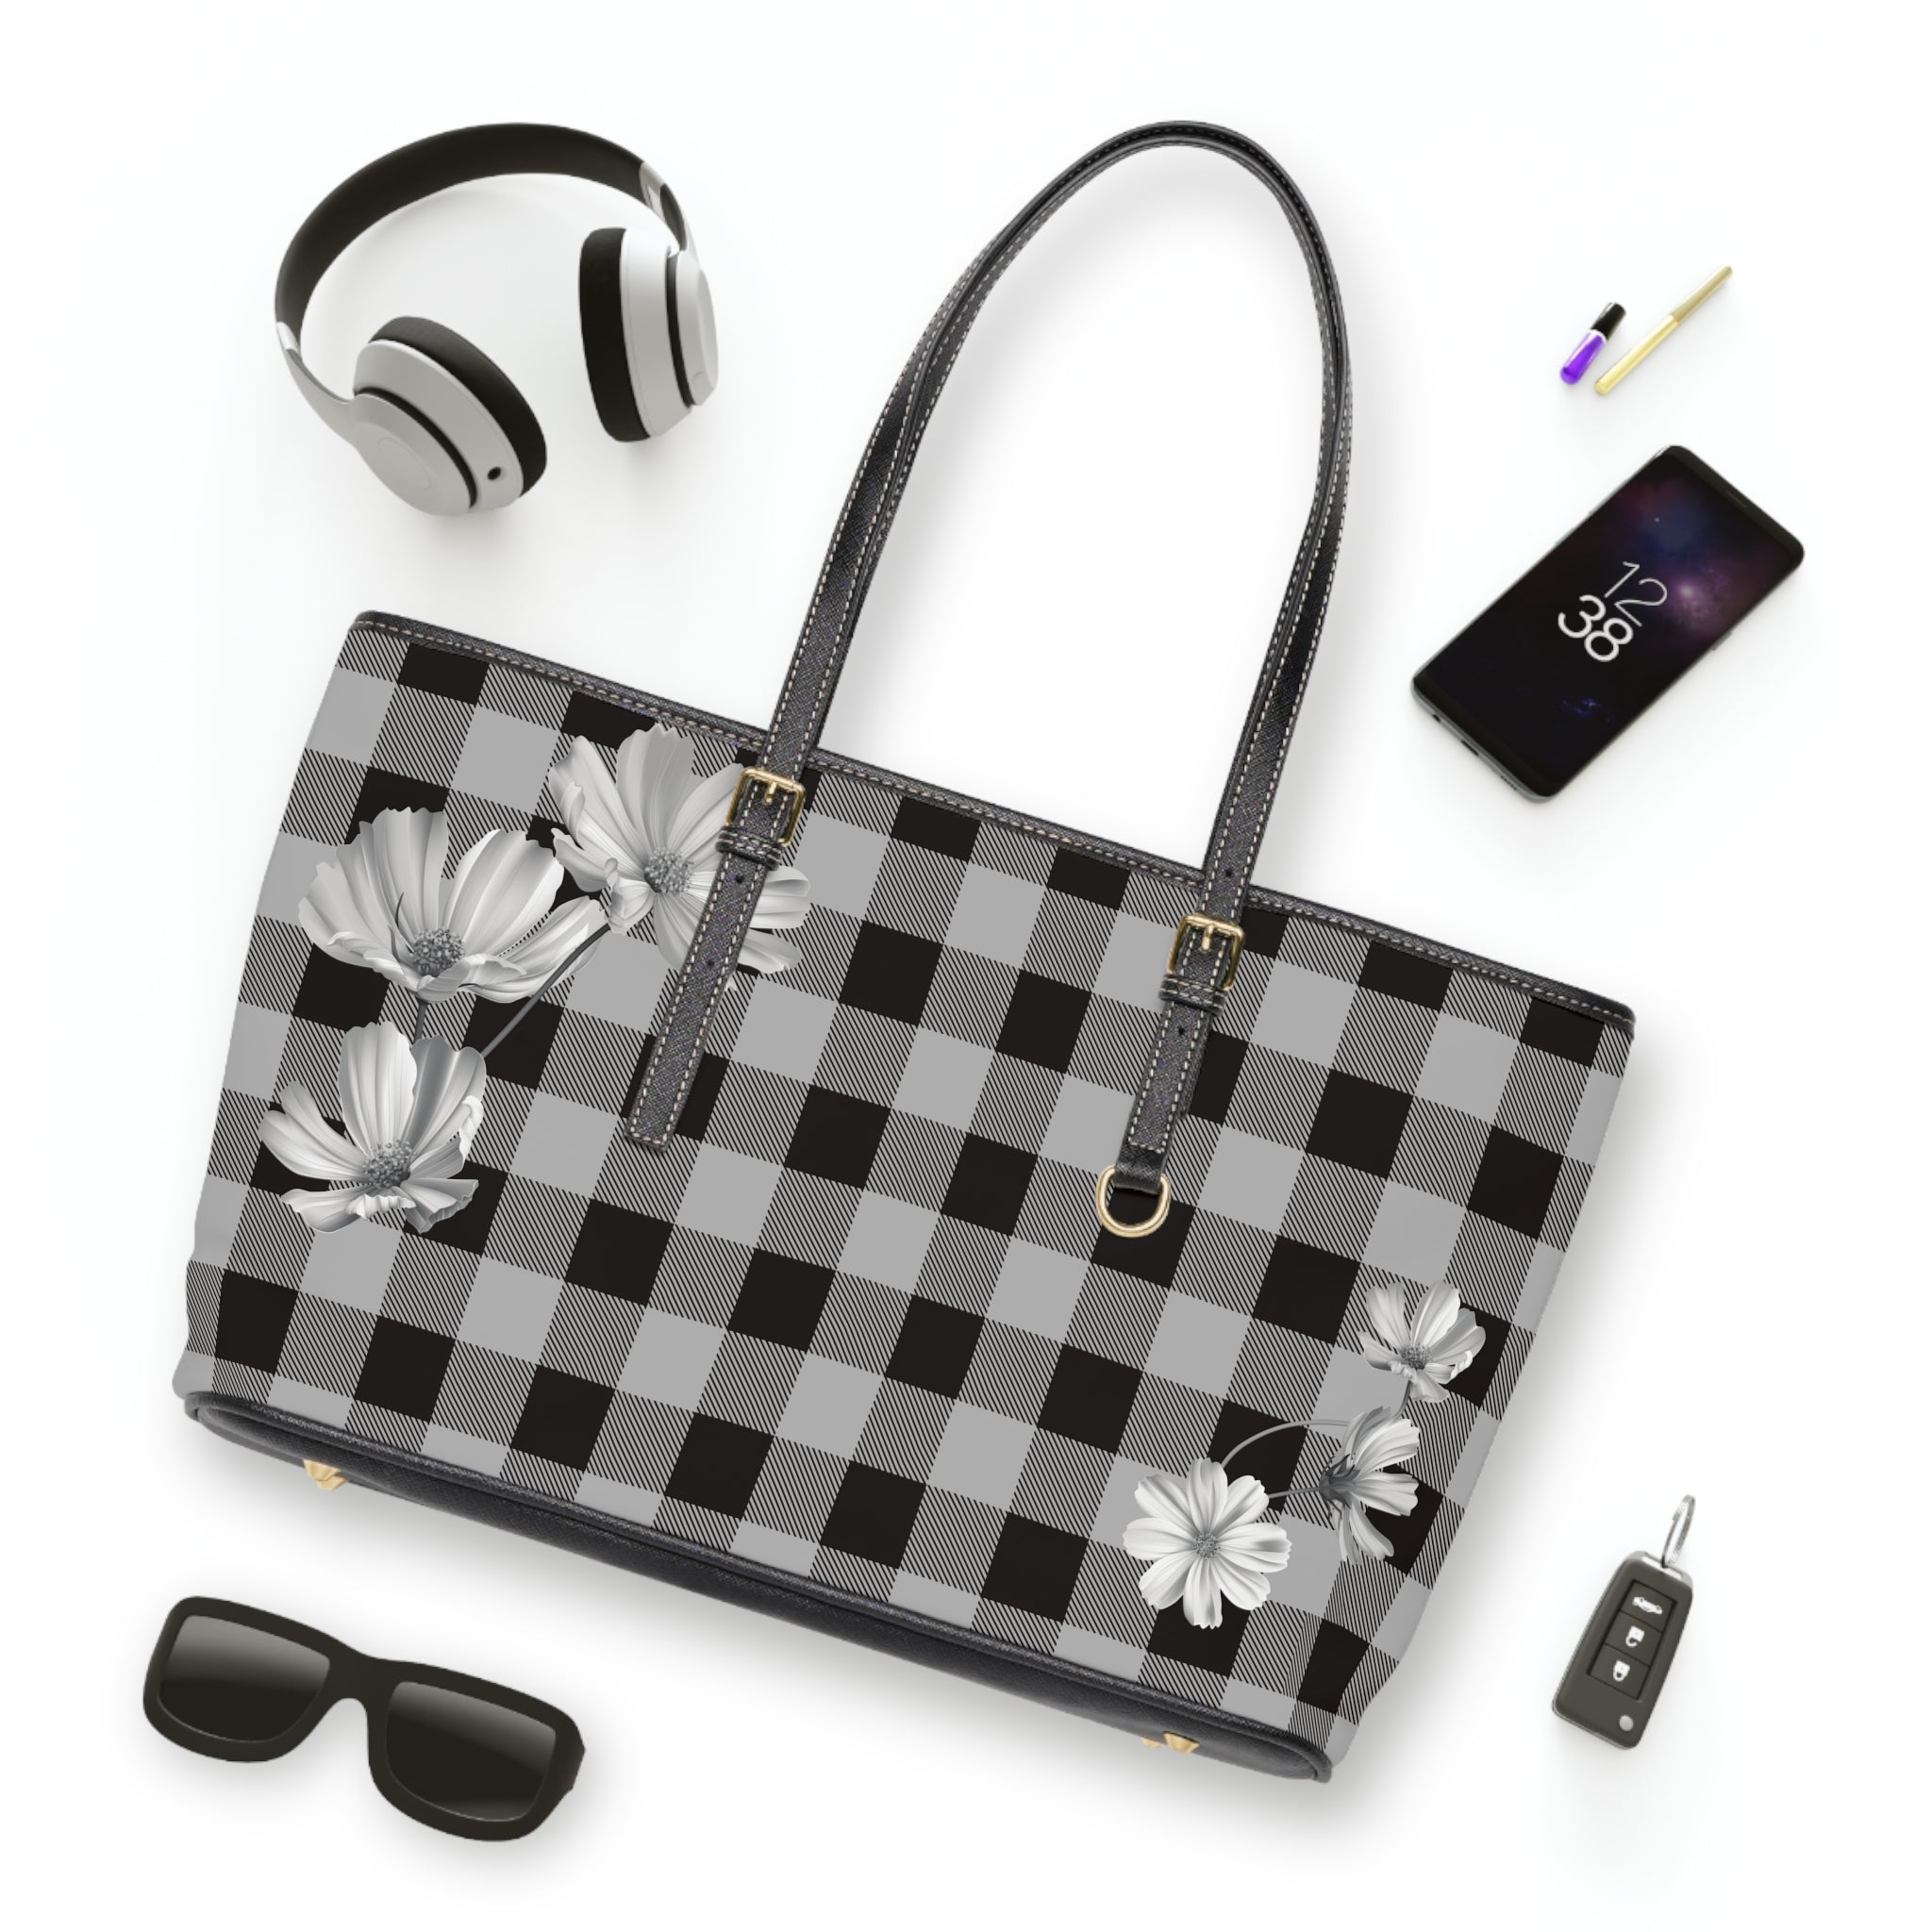 Casual Wear Accessories Check Mate in Gray (Flower) PU Leather Shoulder Bag in Dark Brown, Tote Bag, Weekend Tote, Gift For Her